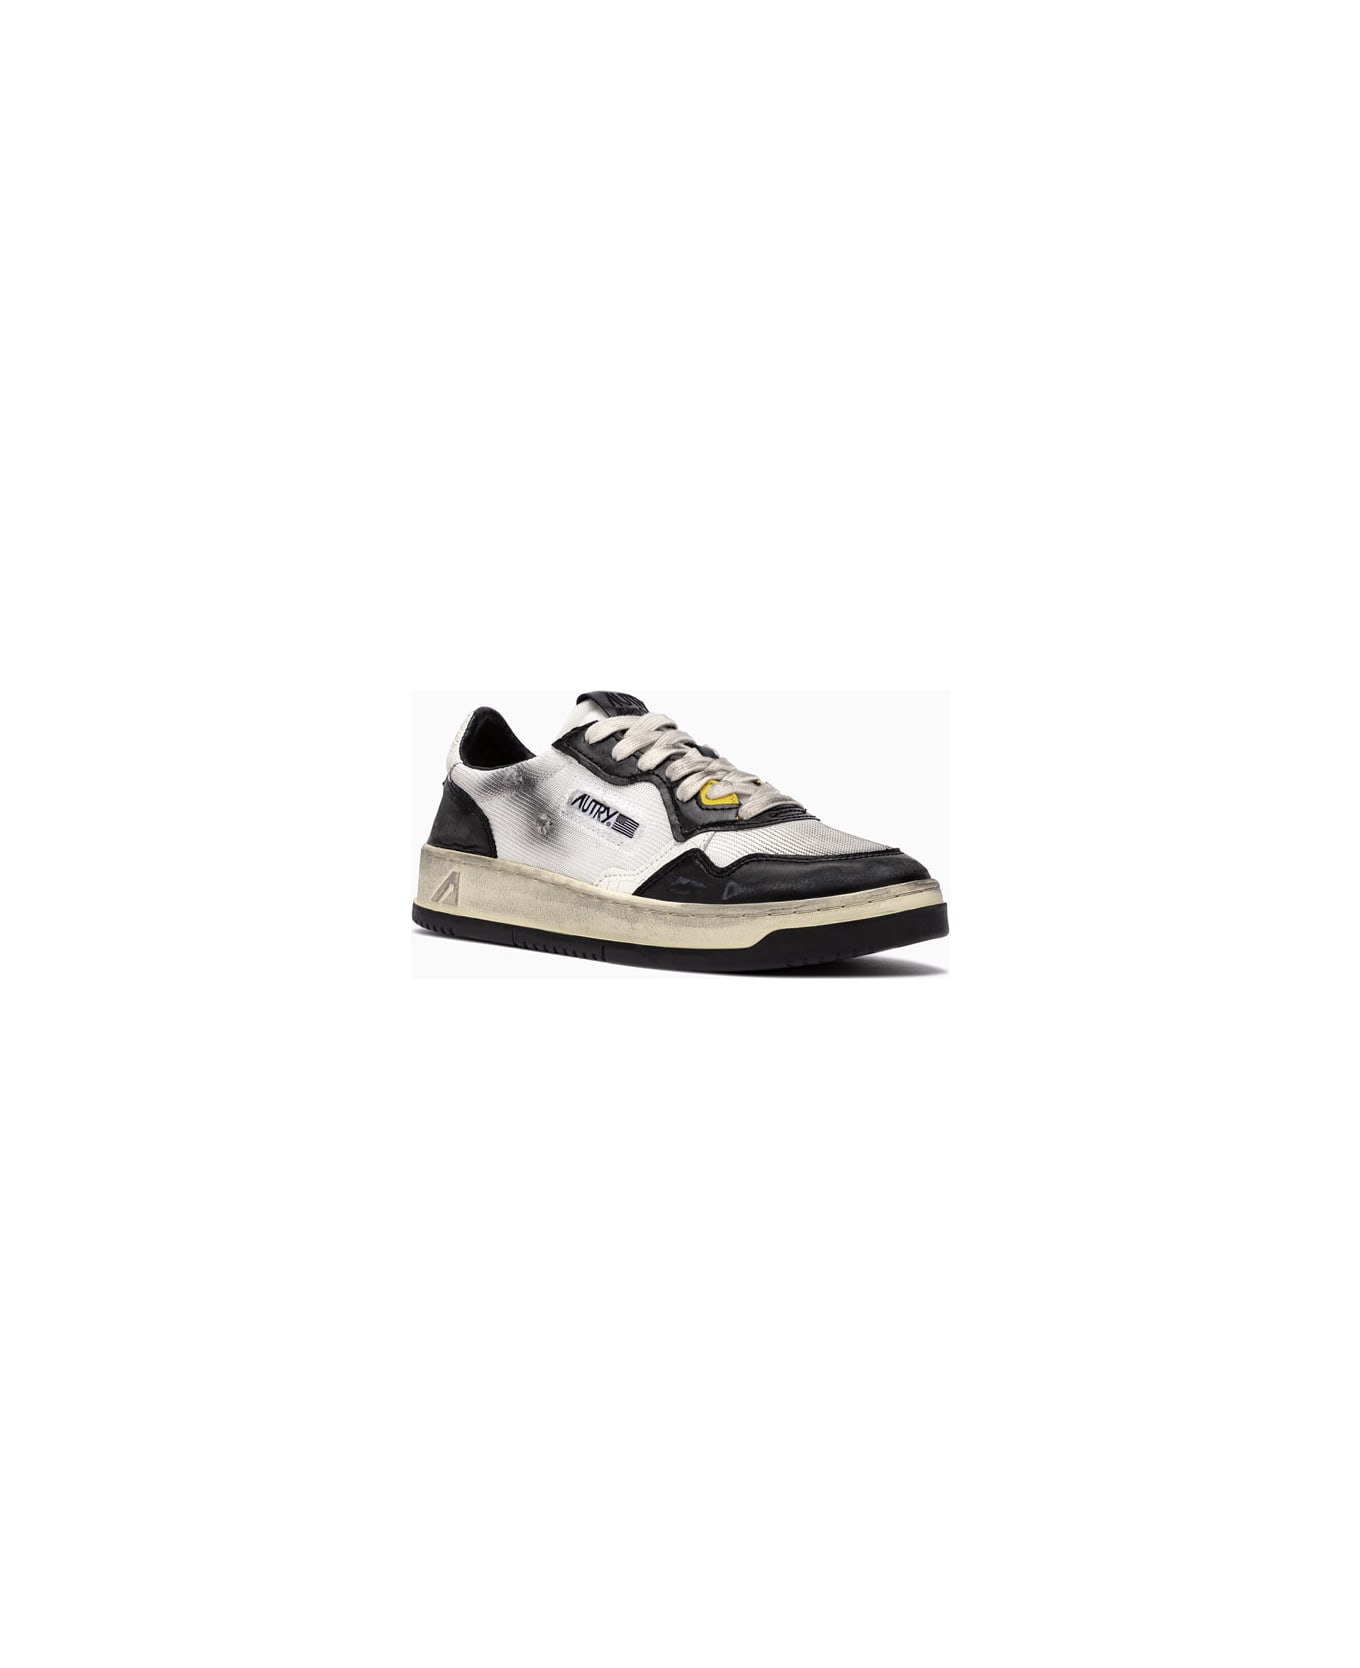 Autry Super Vintage Low Sneakers Avlm Ms10 - WHT/SILVER